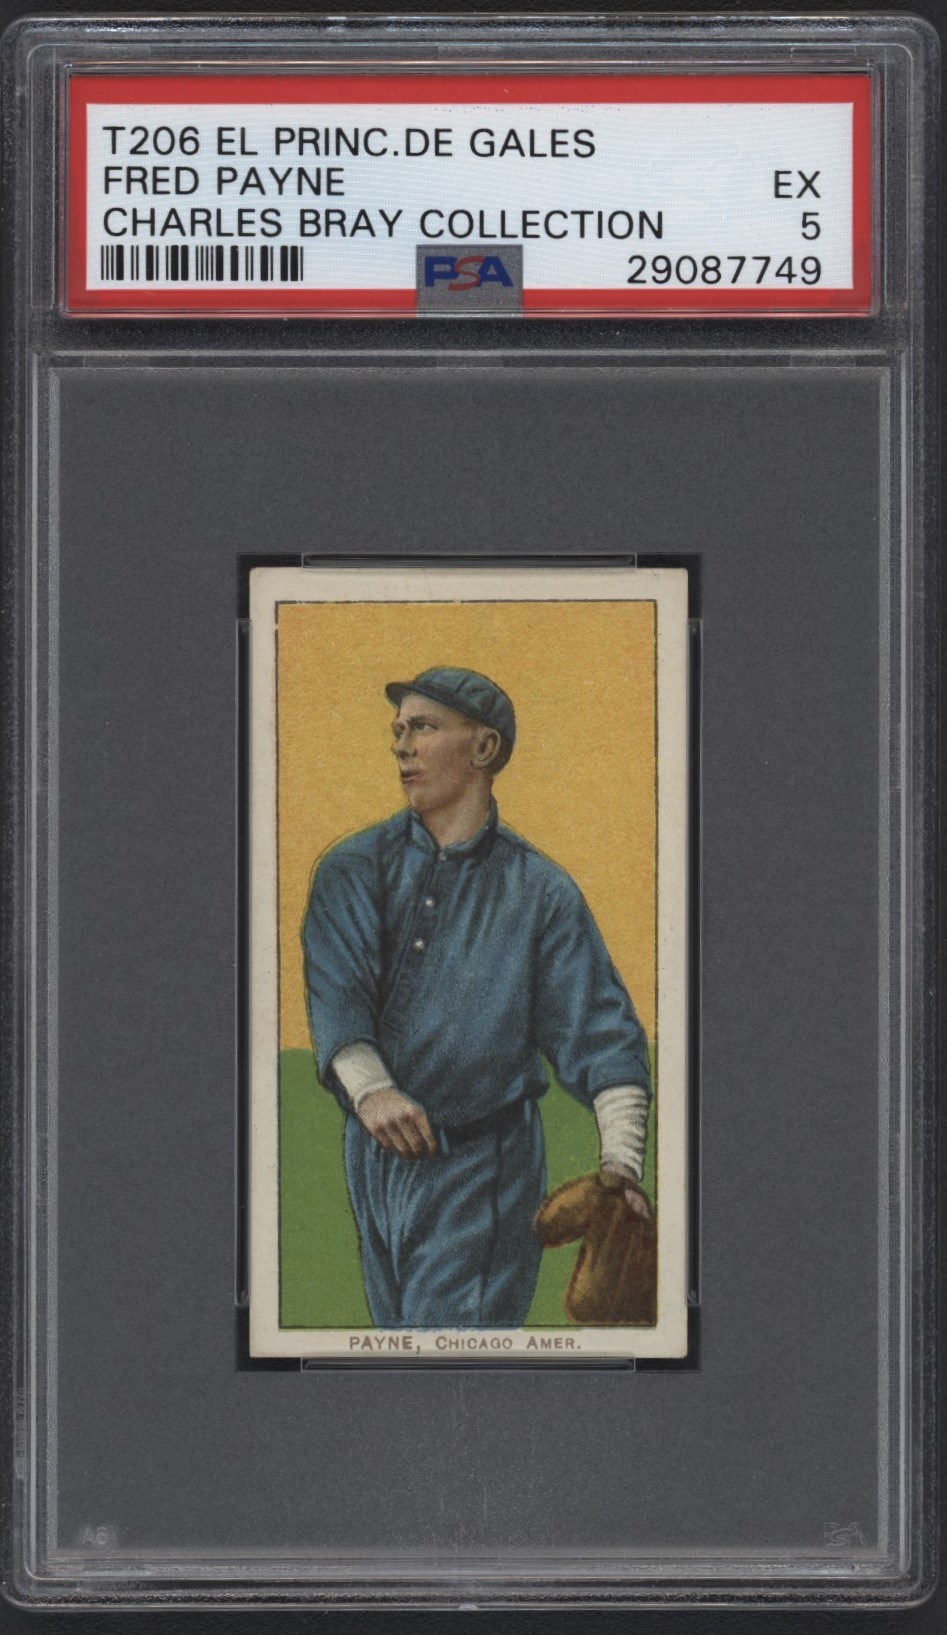 Baseball and Trading Cards - T206 El Principe De Gales Fred Payne PSA EX 5 From the Charles Bray Collection